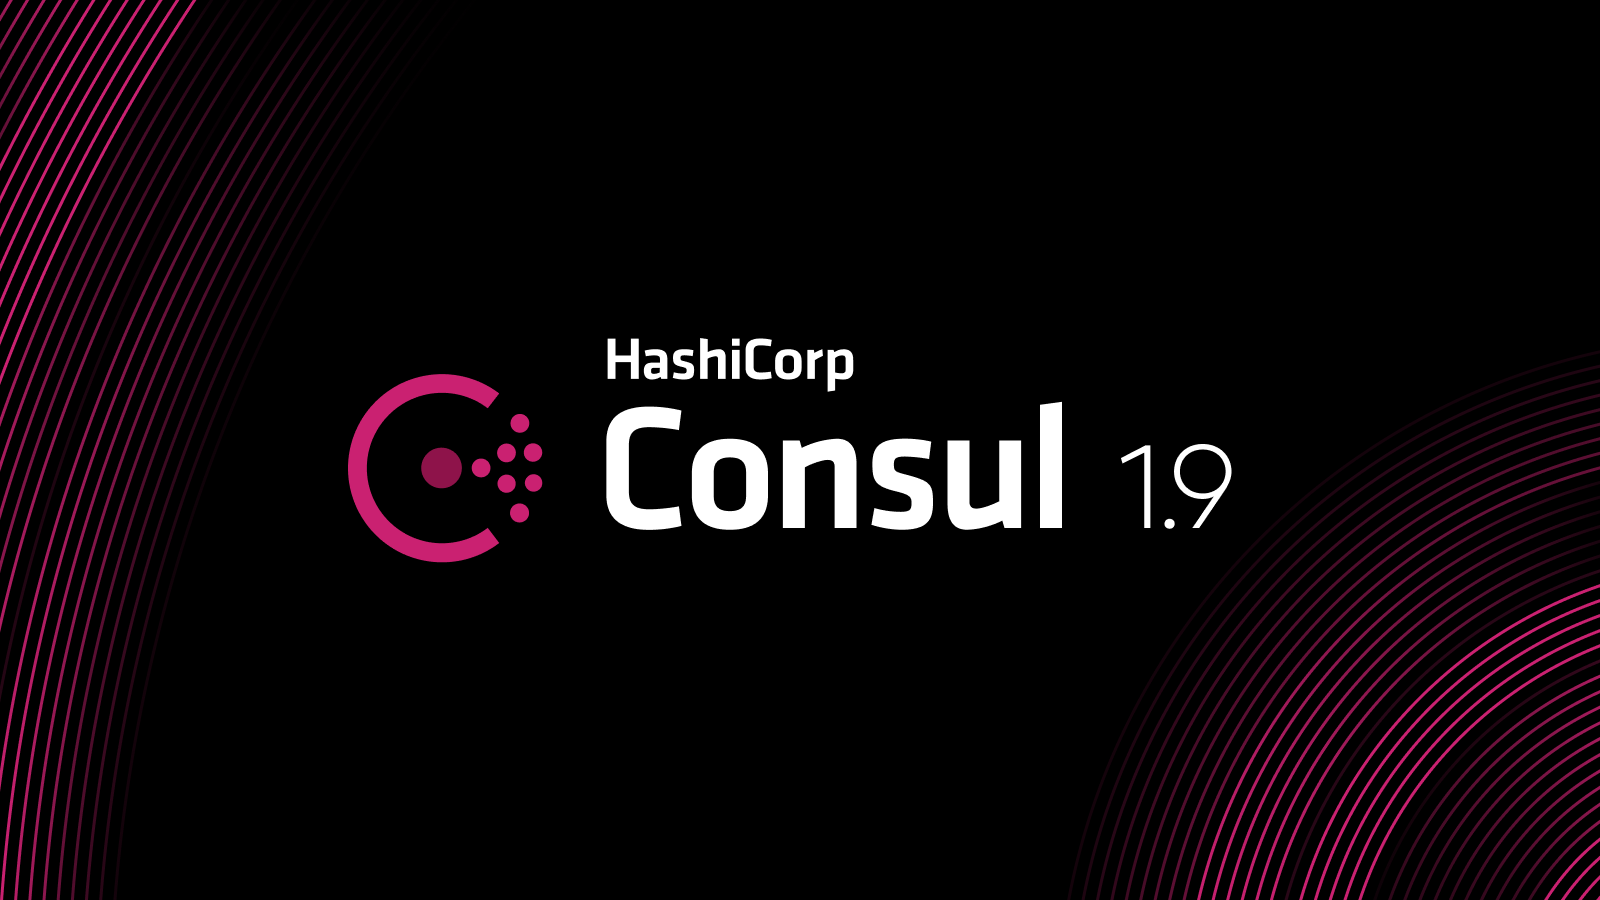 Announcing General Availability of HashiCorp Consul 1.9